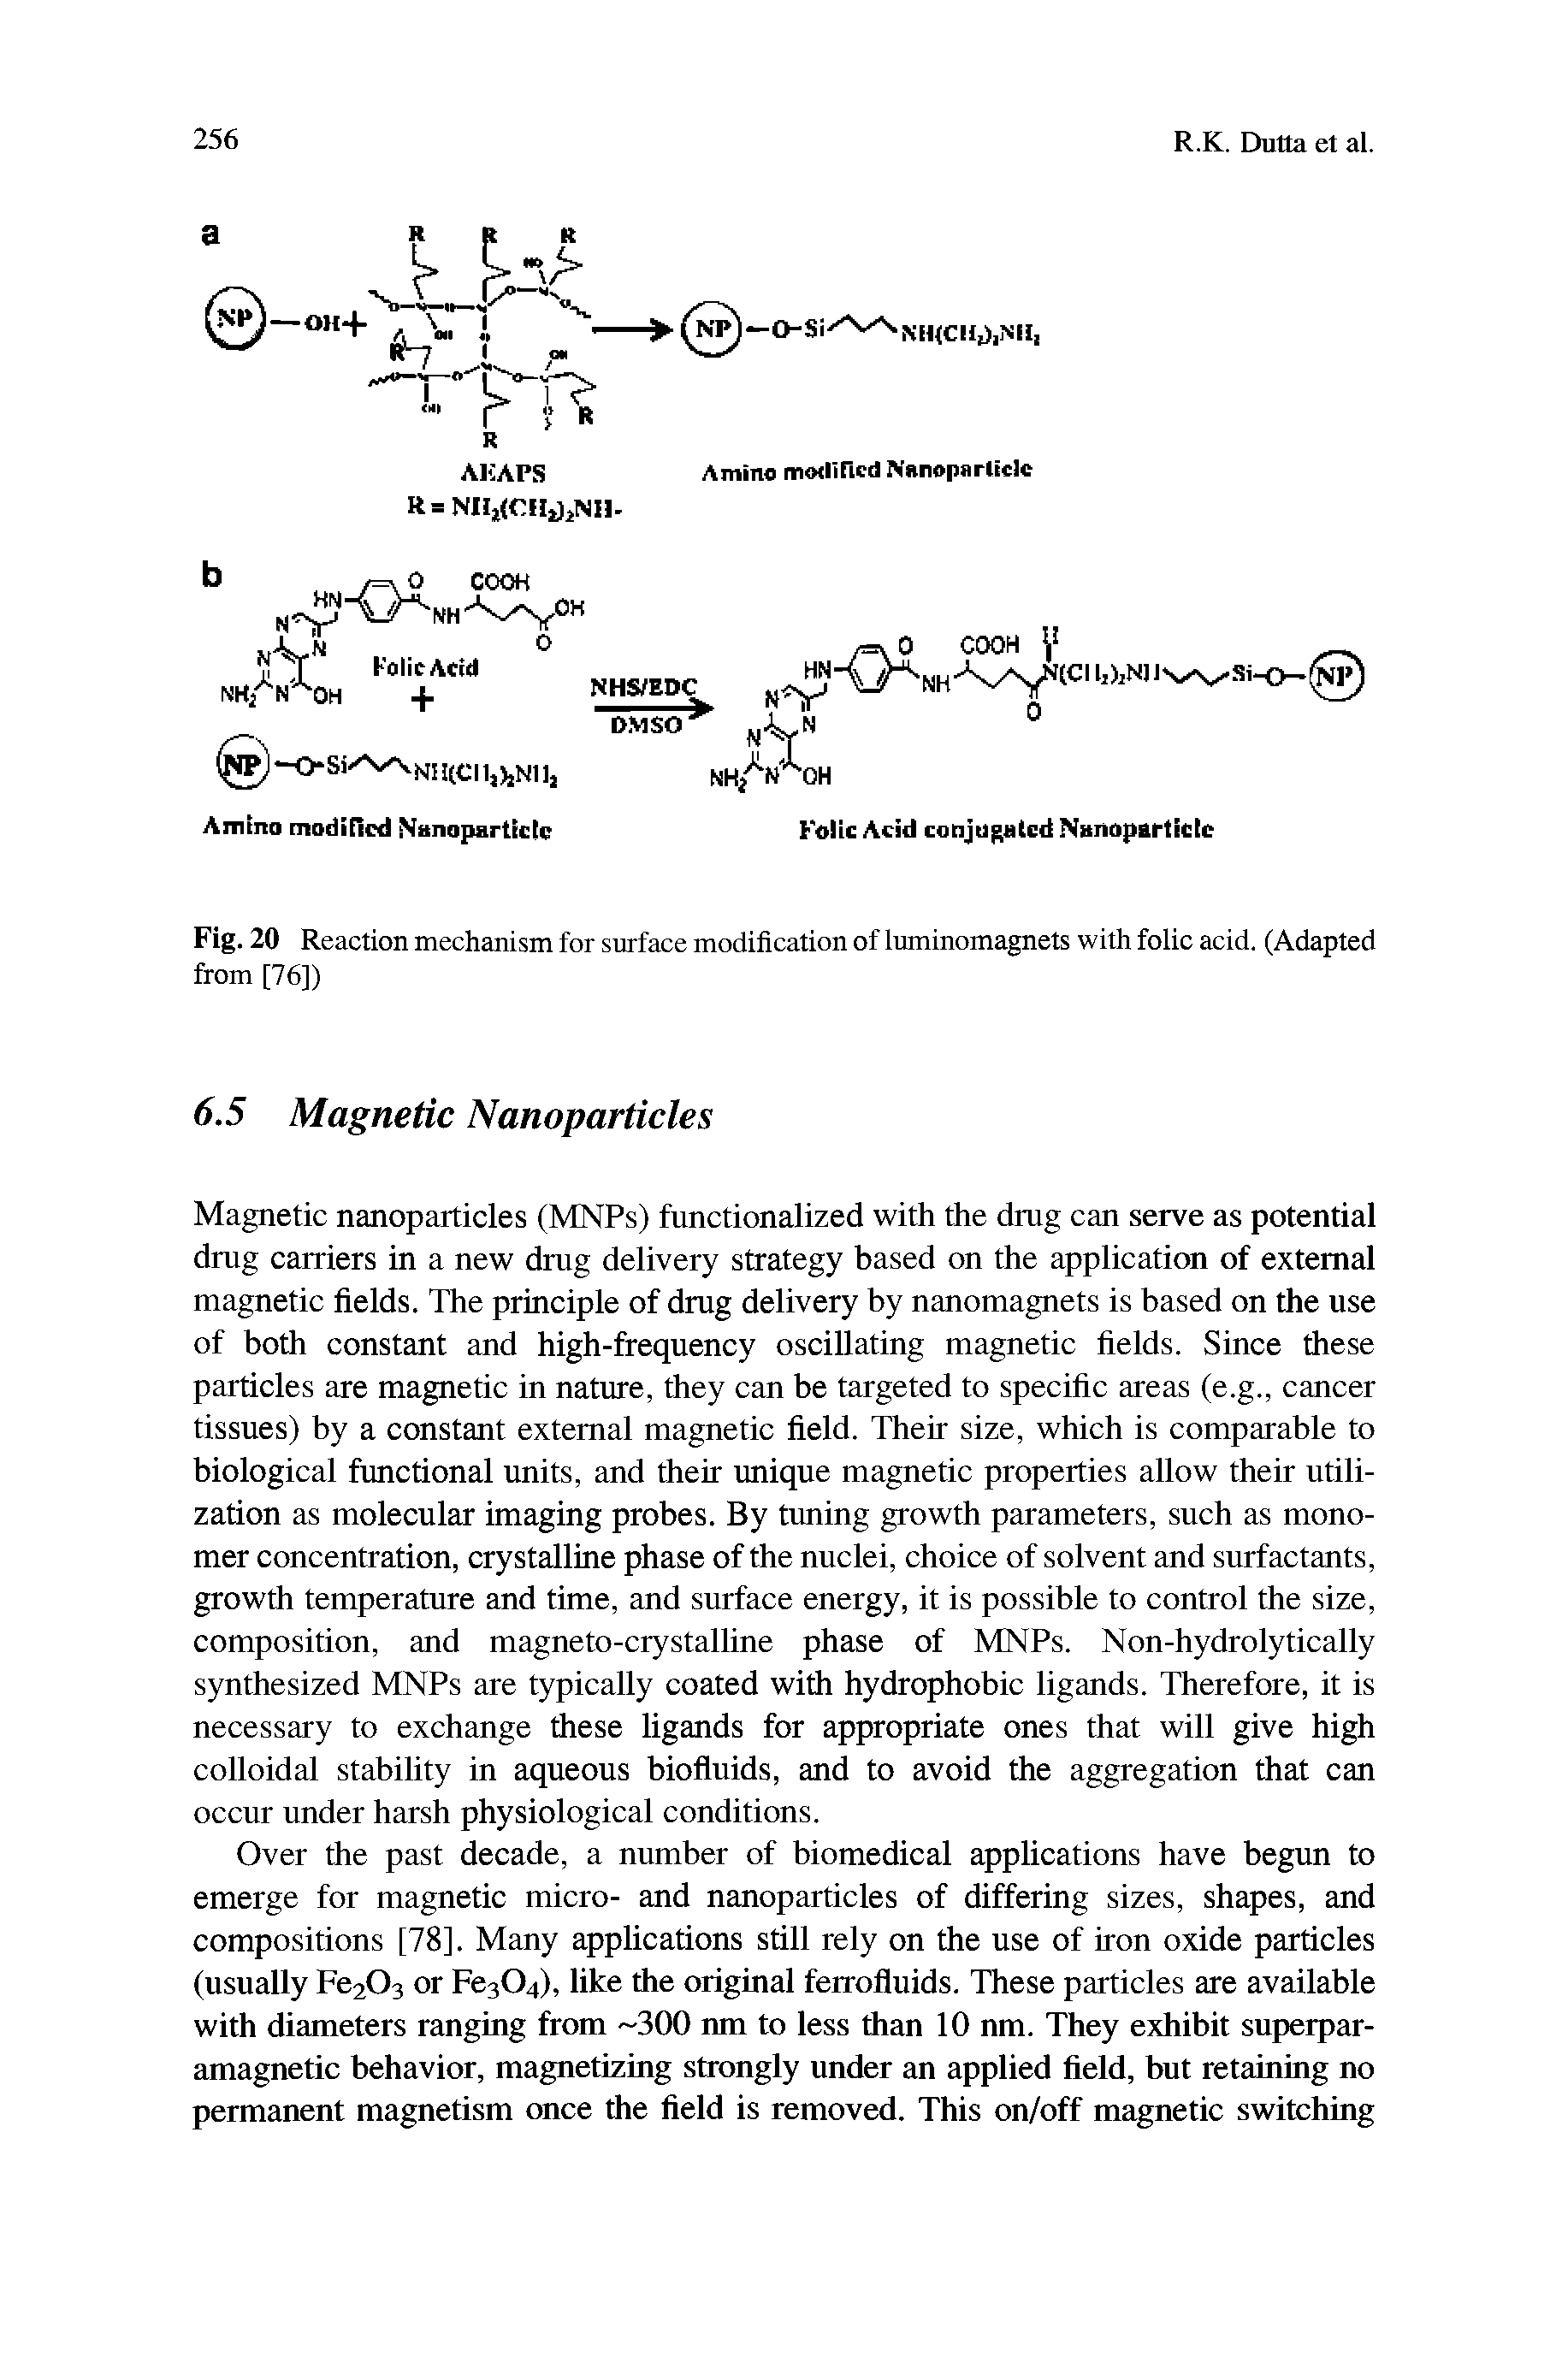 Fig. 20 Reaction mechanism for surface modification of luminomagnets with folic acid. (Adapted from [76])...